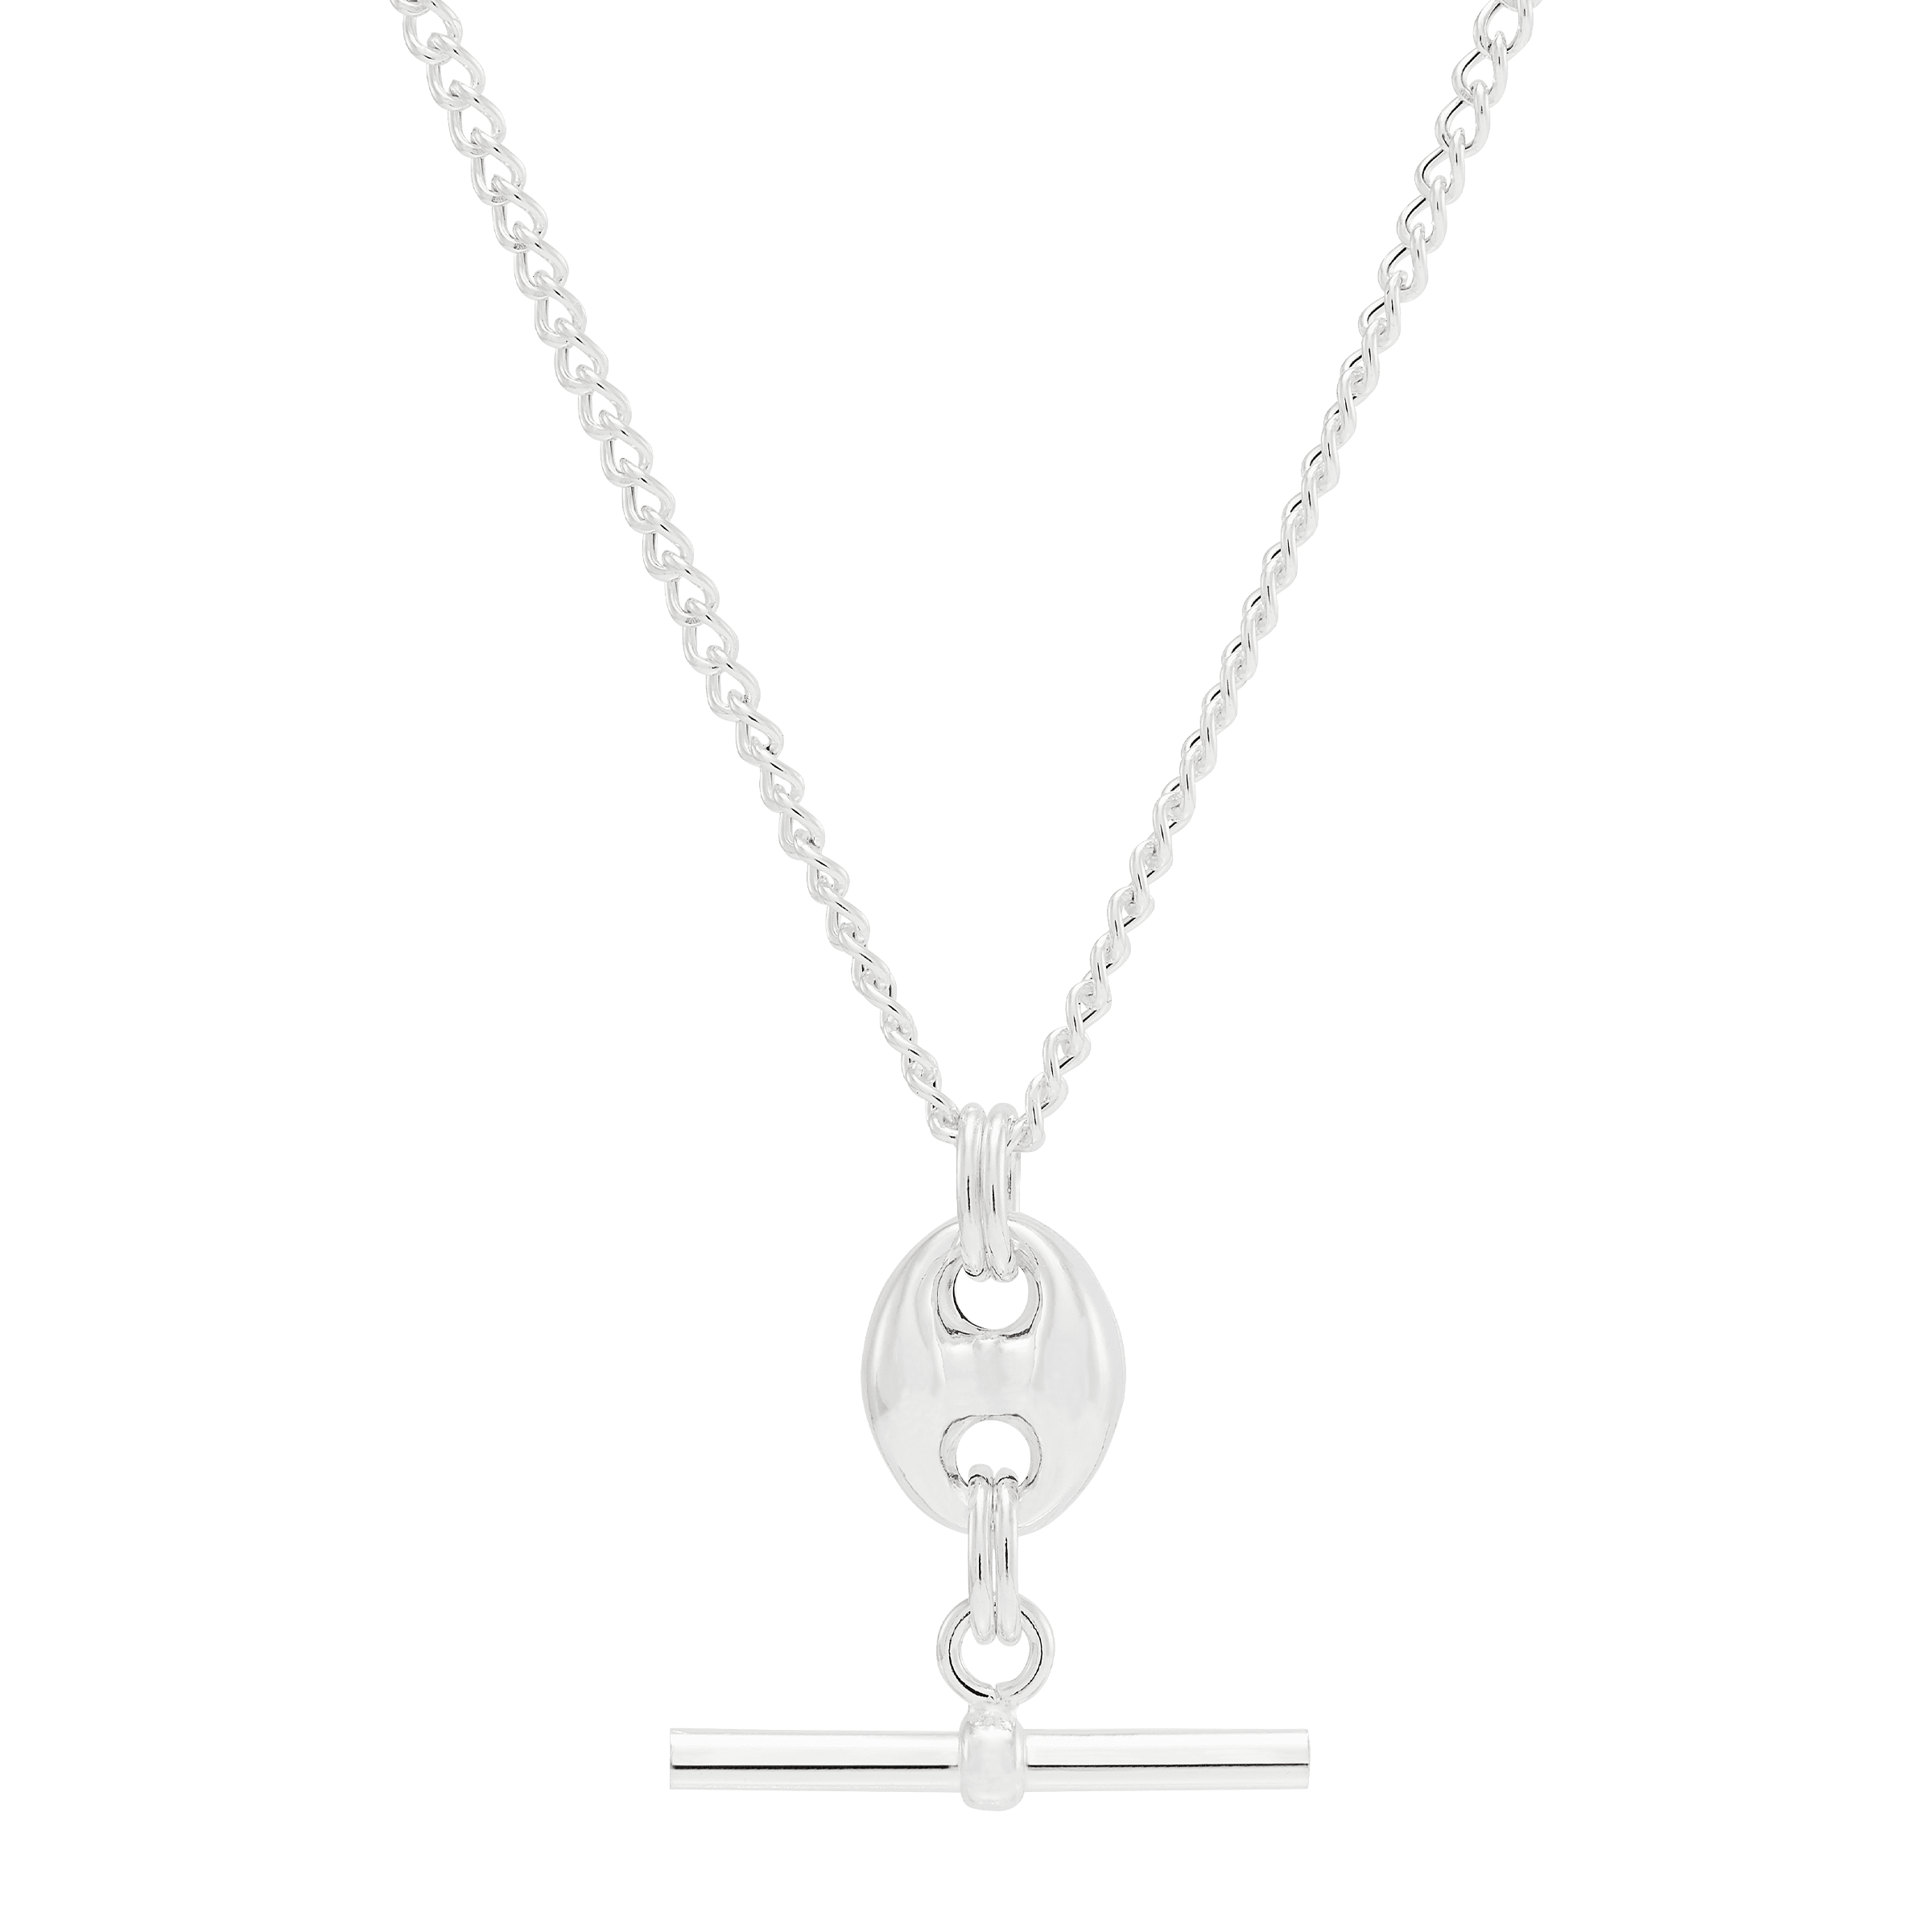 Silpada 'Marina Bay' Sterling Silver Lariat Necklace, 17